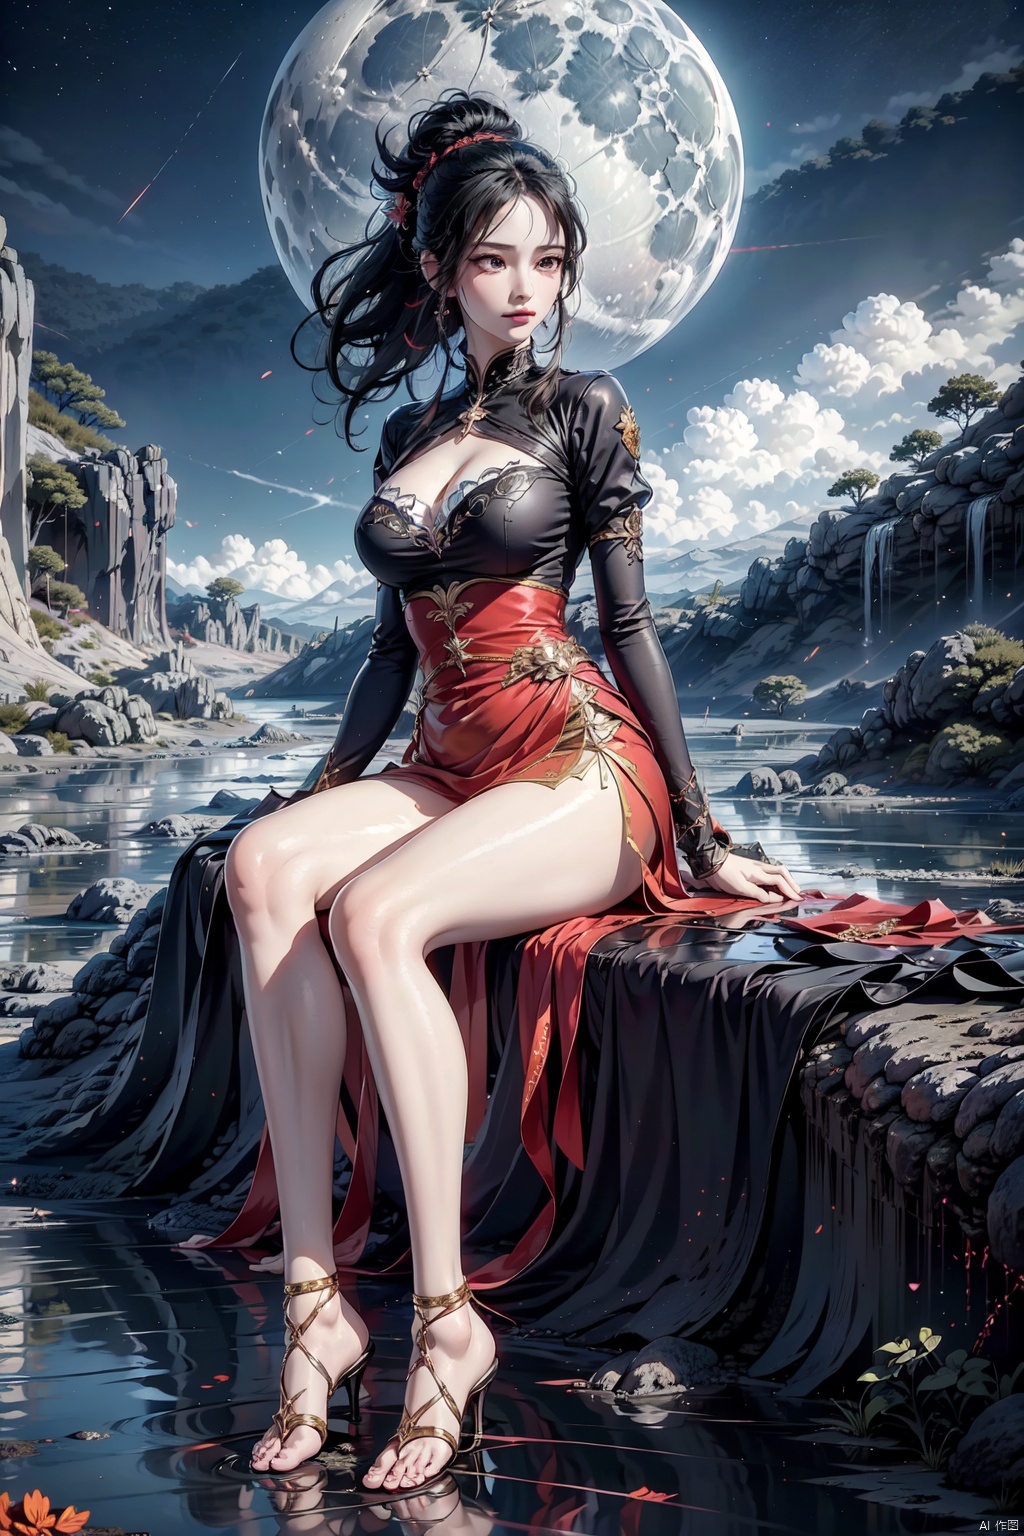  1 girl, knight, (HDR: 1.4), high contrast, low saturation, white short-sleeved shirt, black mini skirt, short hair, single ponytail, hair tied with a red ribbon, color block background, whole body, soft clothing texture, eyes looking at viewer, horizontal, lake, moonlight, bare feet, elegance, shooting star, starlight, red ribbon fluttering in the wind, sword, foreground